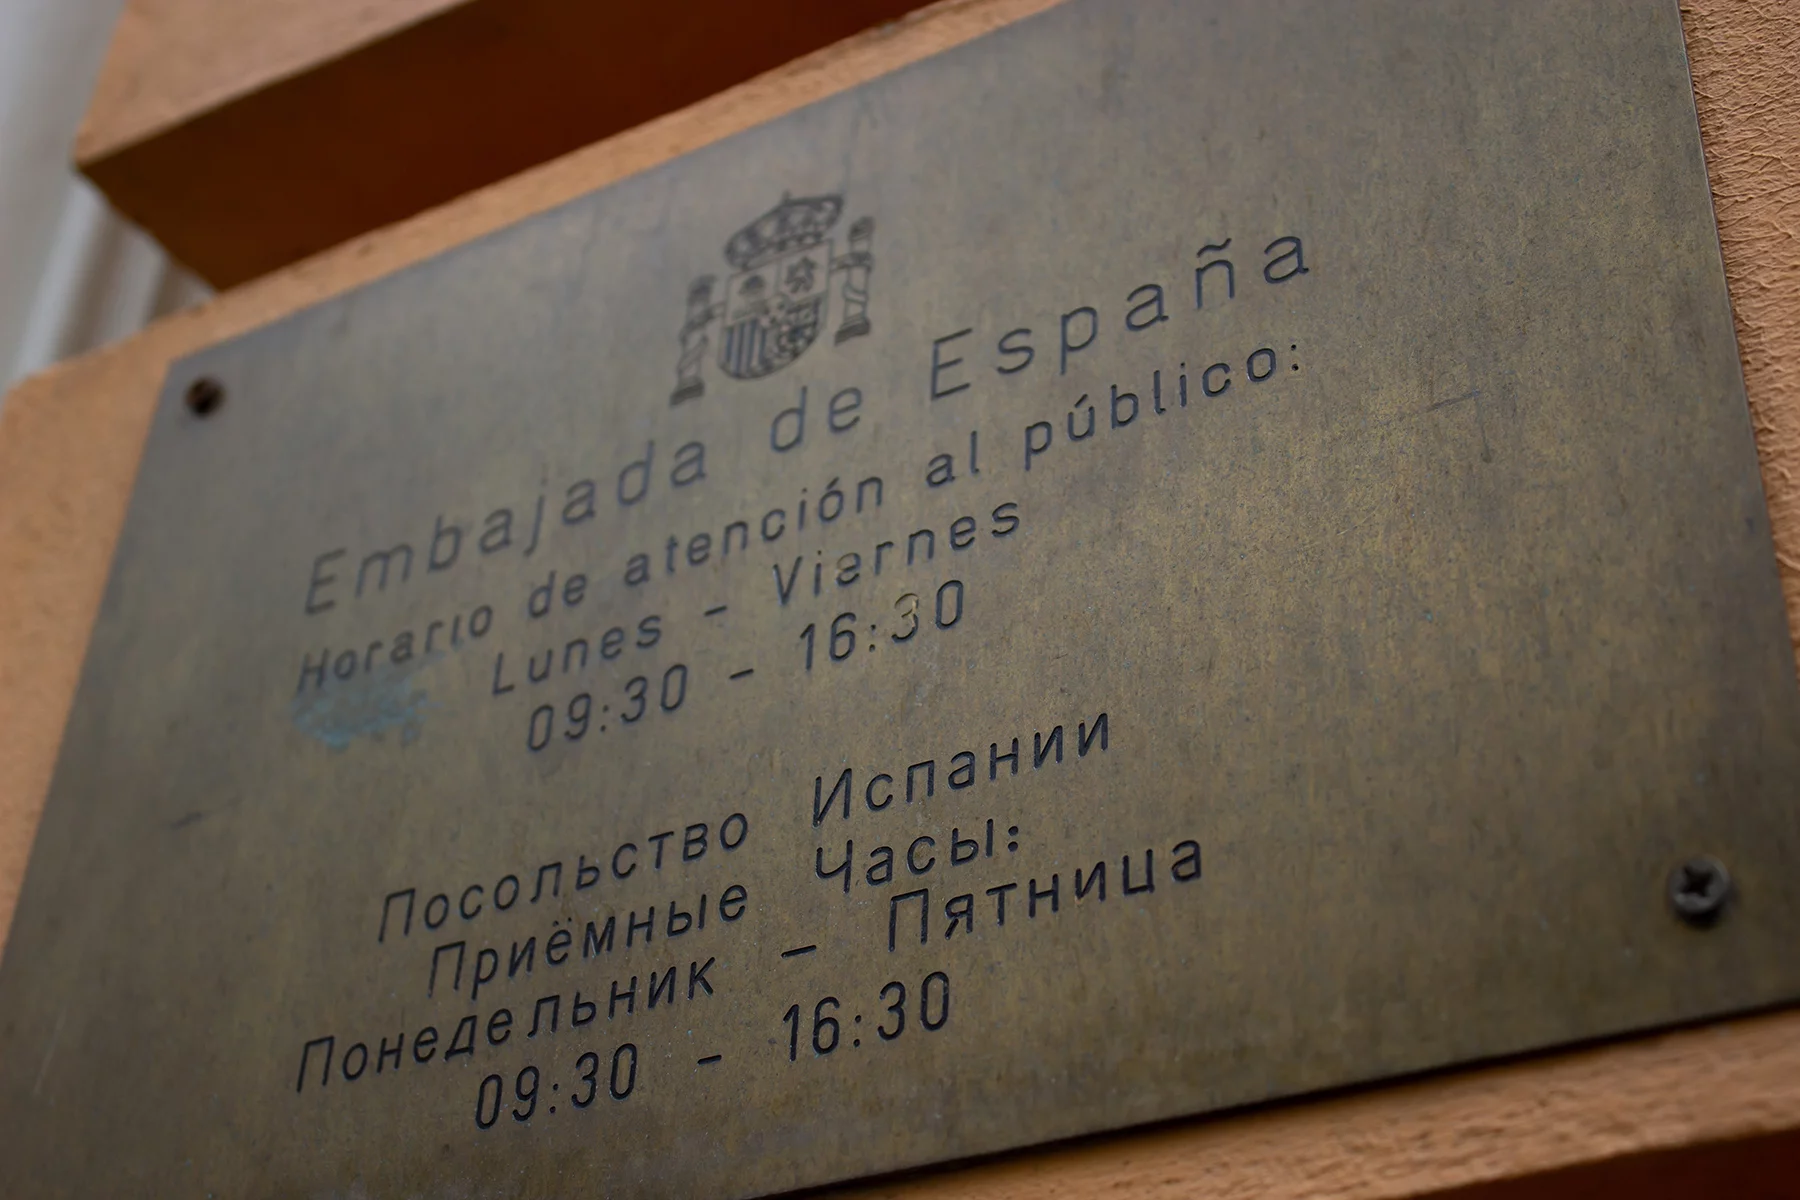 Sign indicating the opening hours of a Spanish embassy